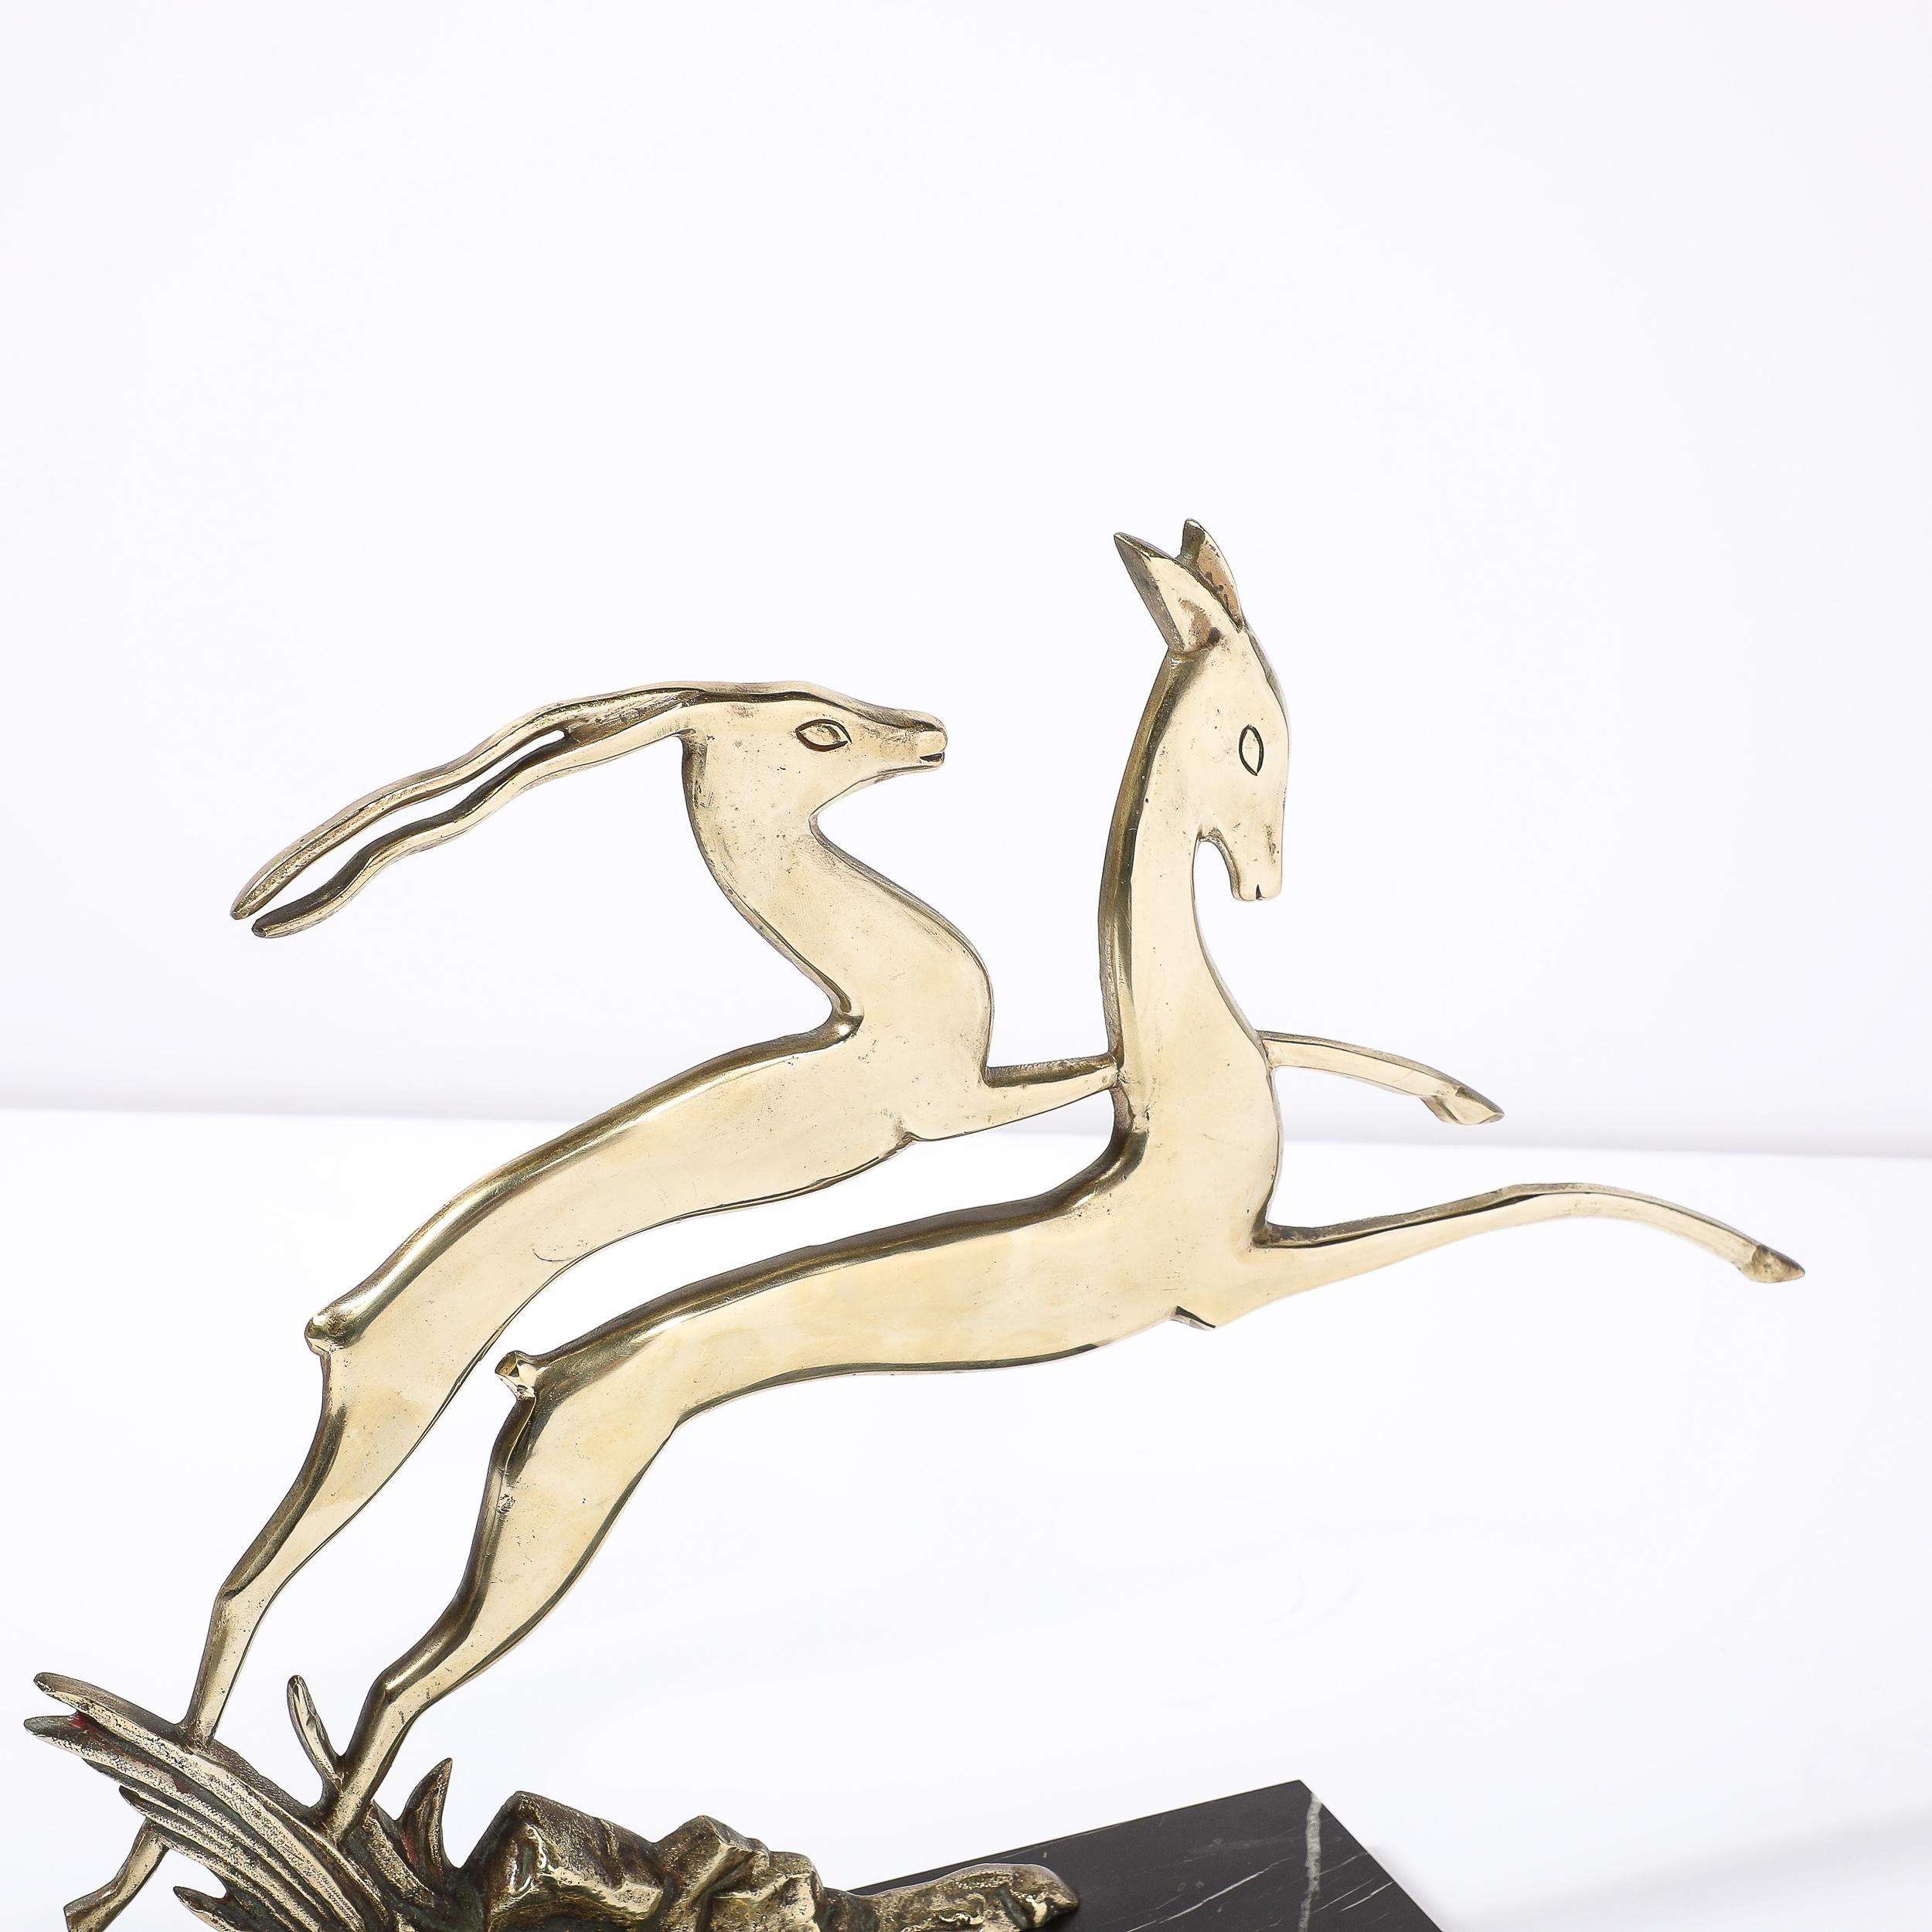 Art Deco Leaping Gazelle Sculpture in Polished Brass on Black Marble Base For Sale 6